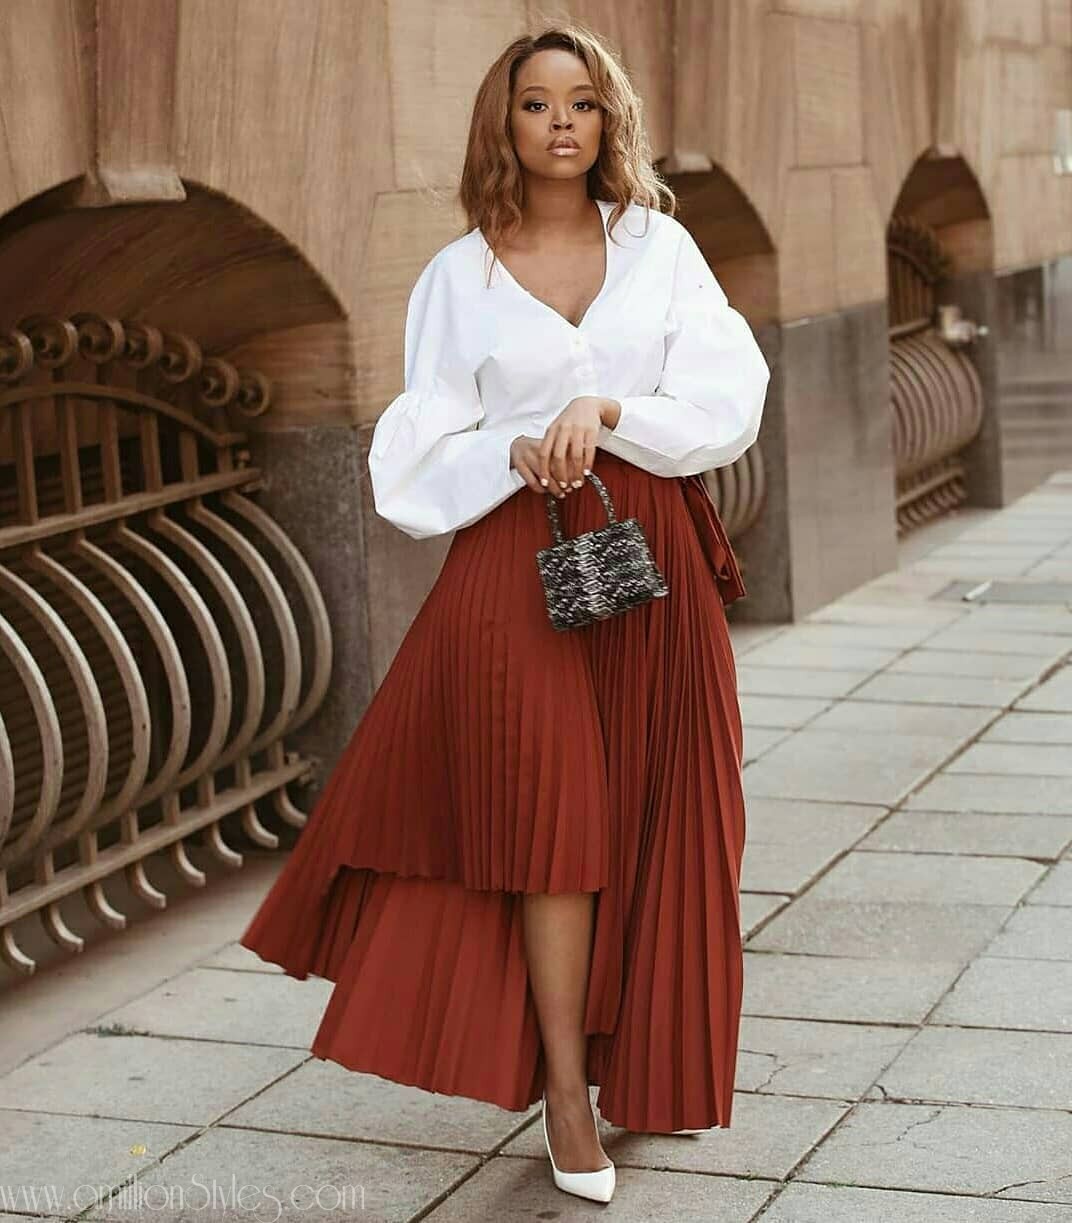 Here Are 8 Stylish Ways To Wear Pleats